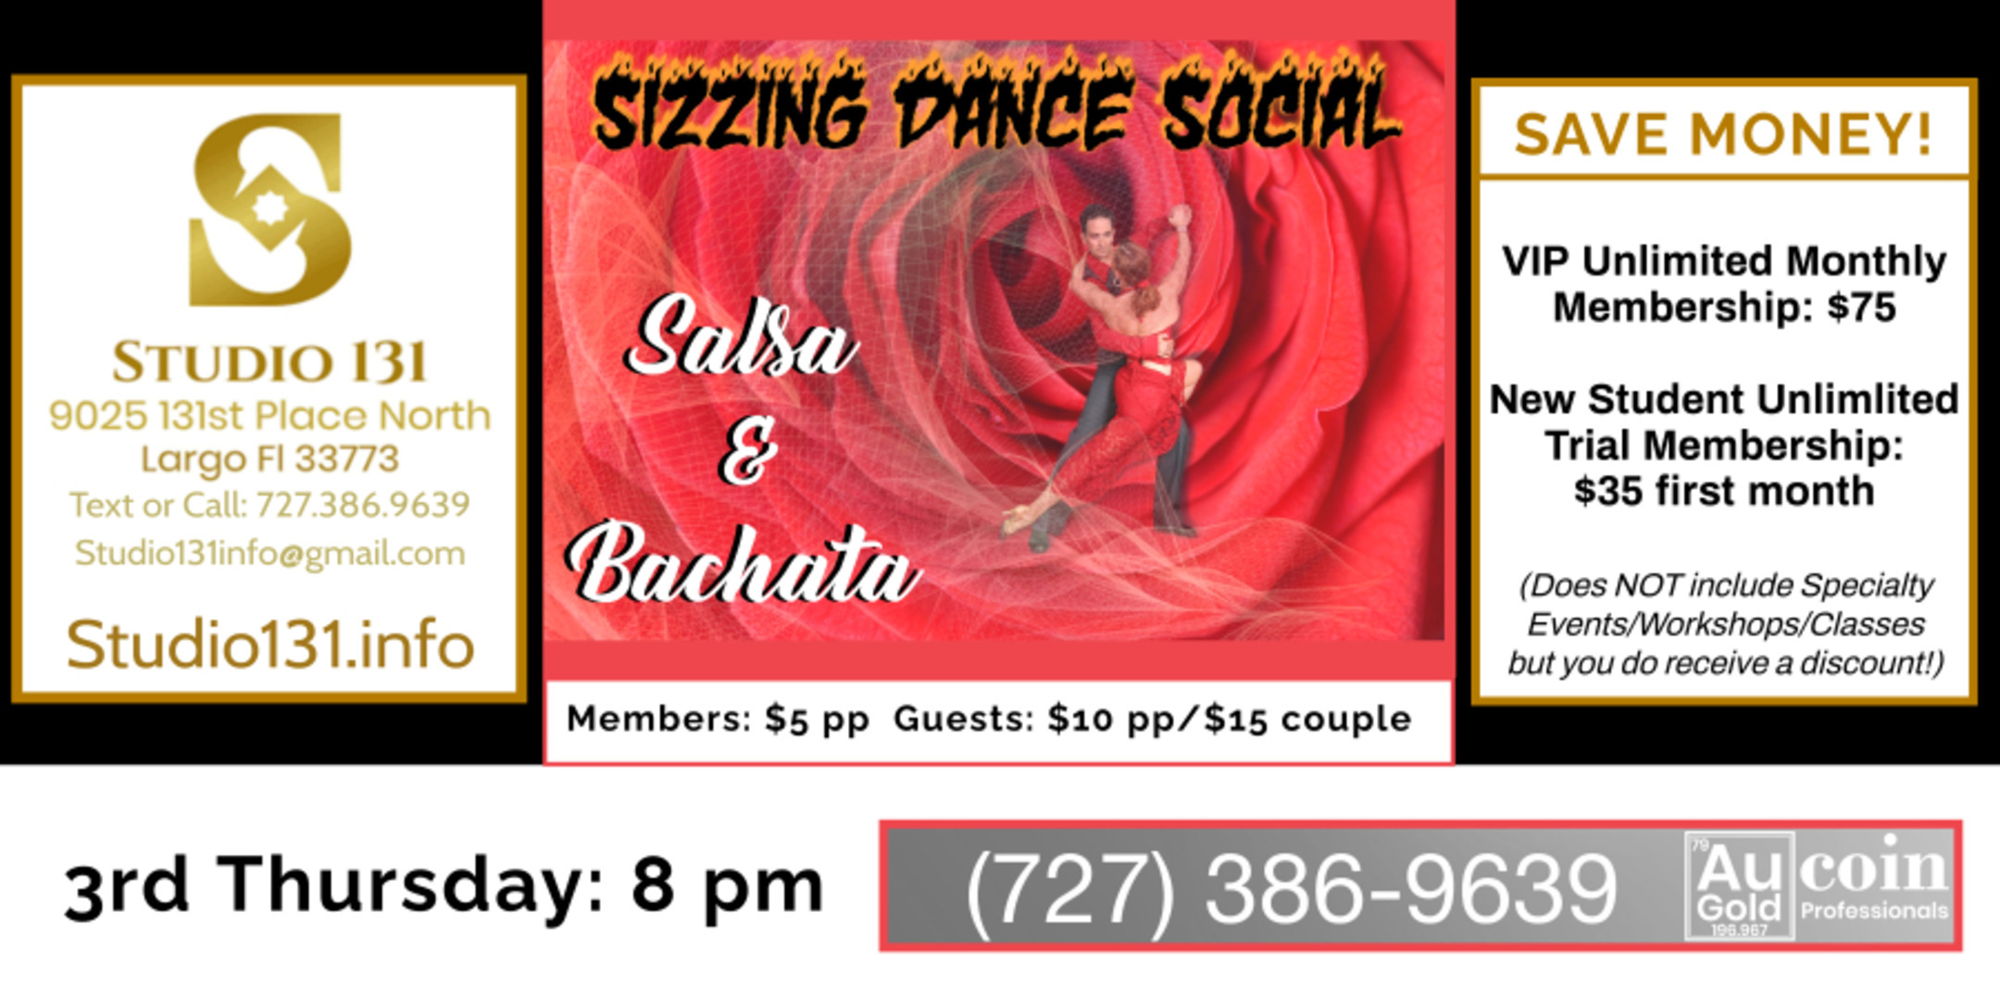 Sizzling Dance Social every third Thursday of the month promotional image